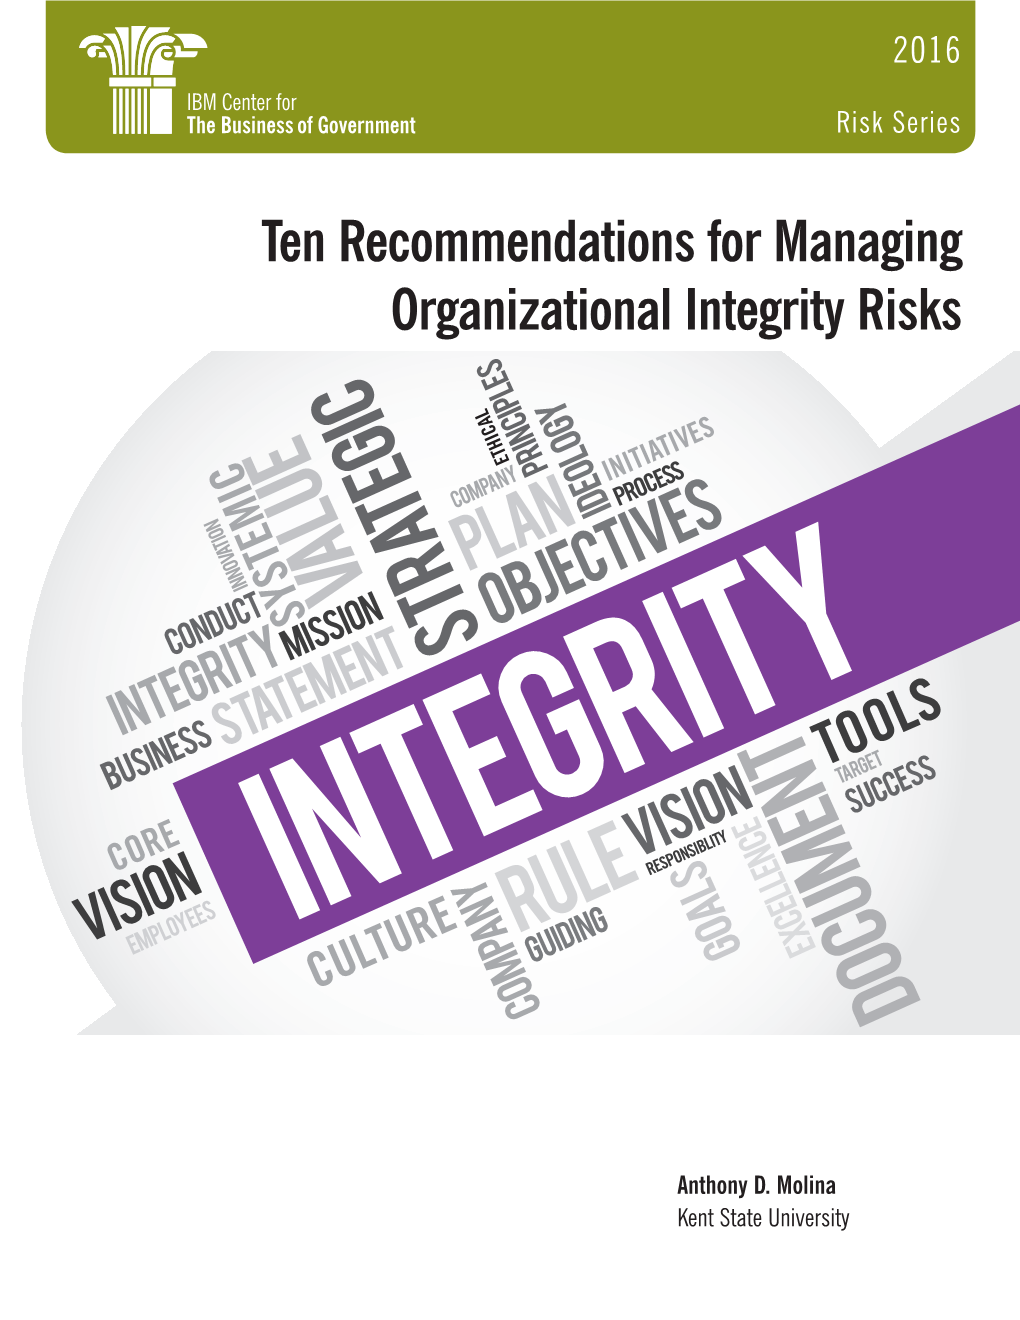 Ten Recommendations for Managing Organizational Integrity Risks